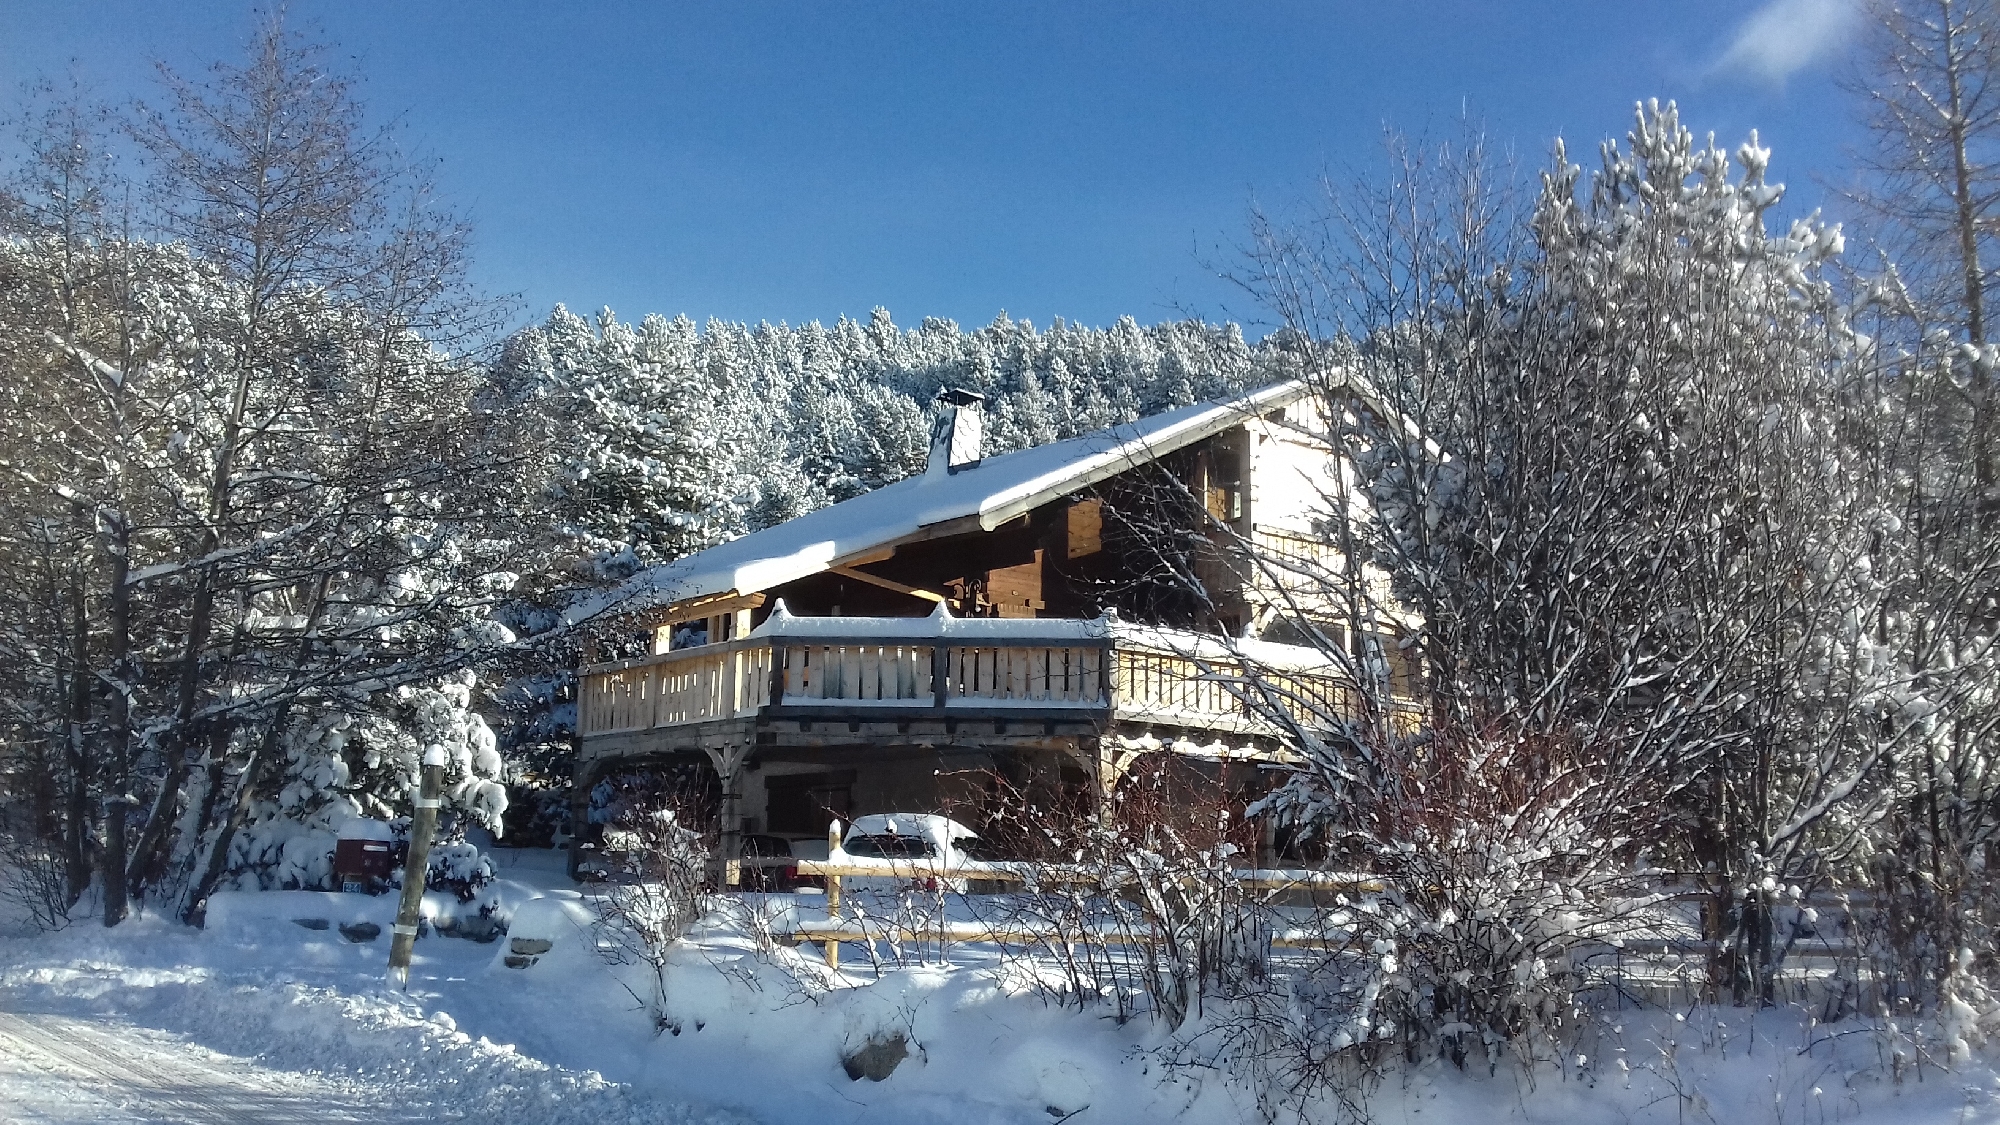 gite de france 4persons chalet Cartier, self catering near the ski resort of Bolquere / p2000 and Font-Romeu